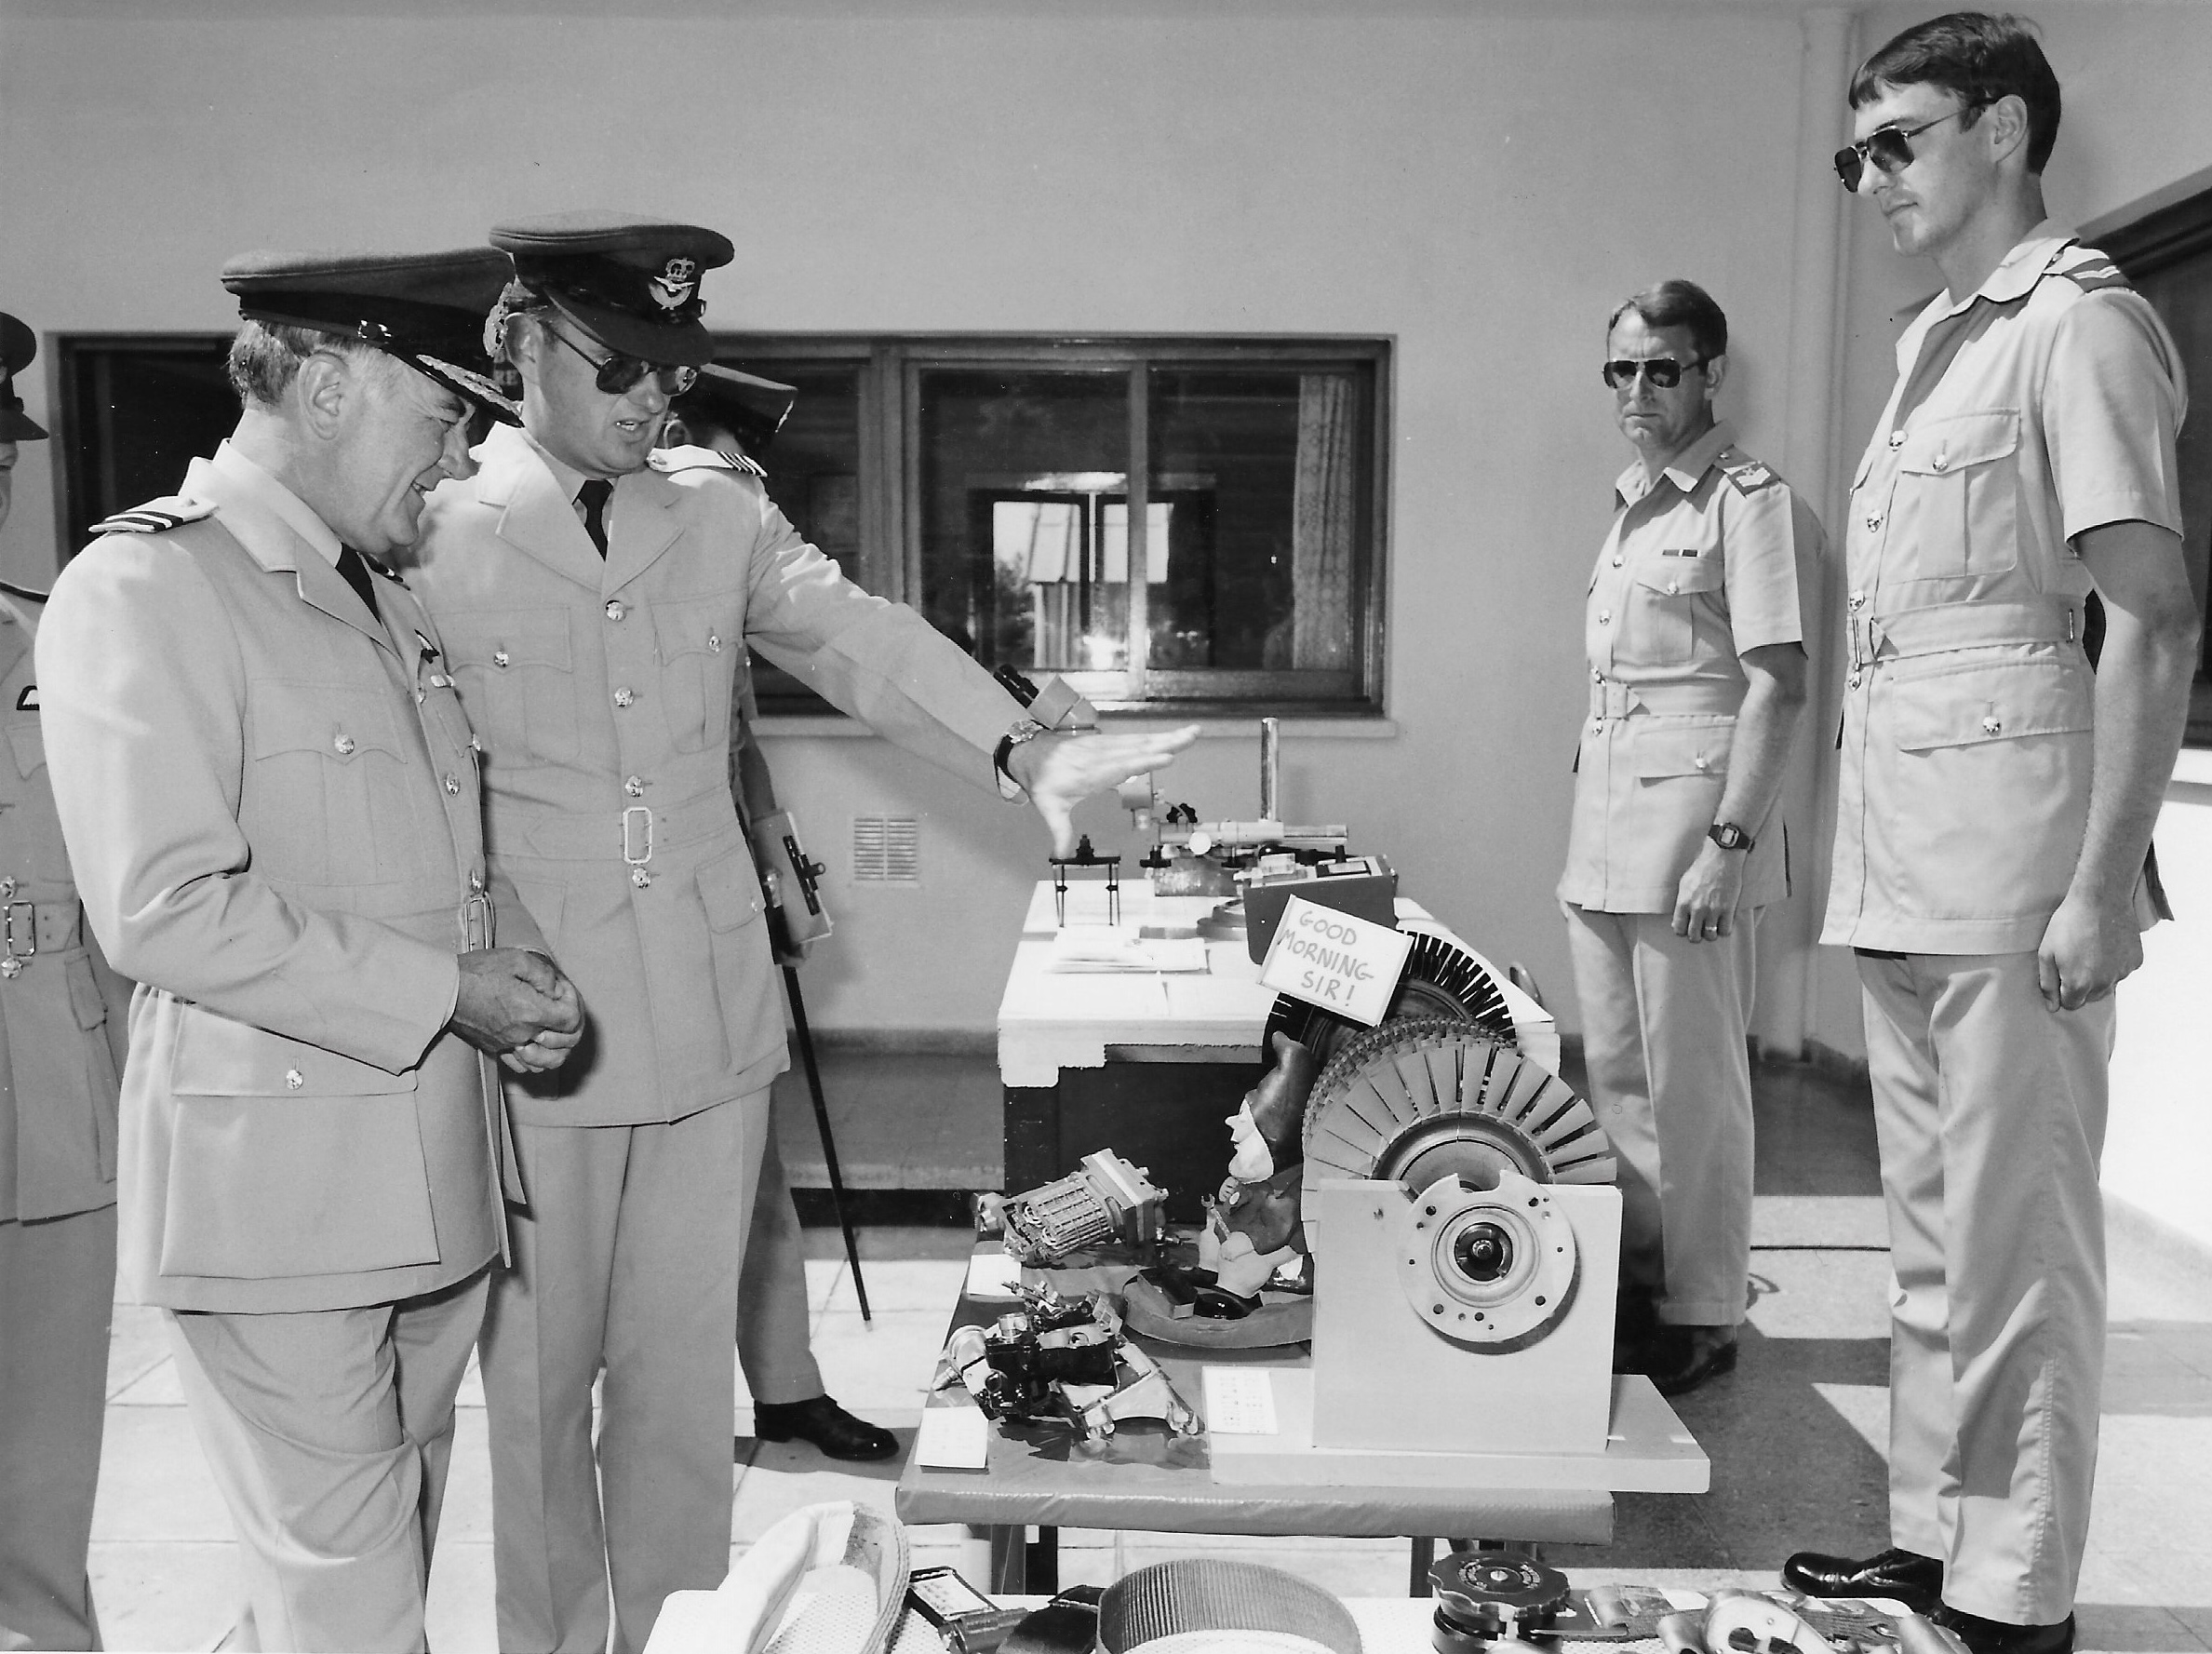 Black and white image shows Image shows RAF Aviators during inspection. 